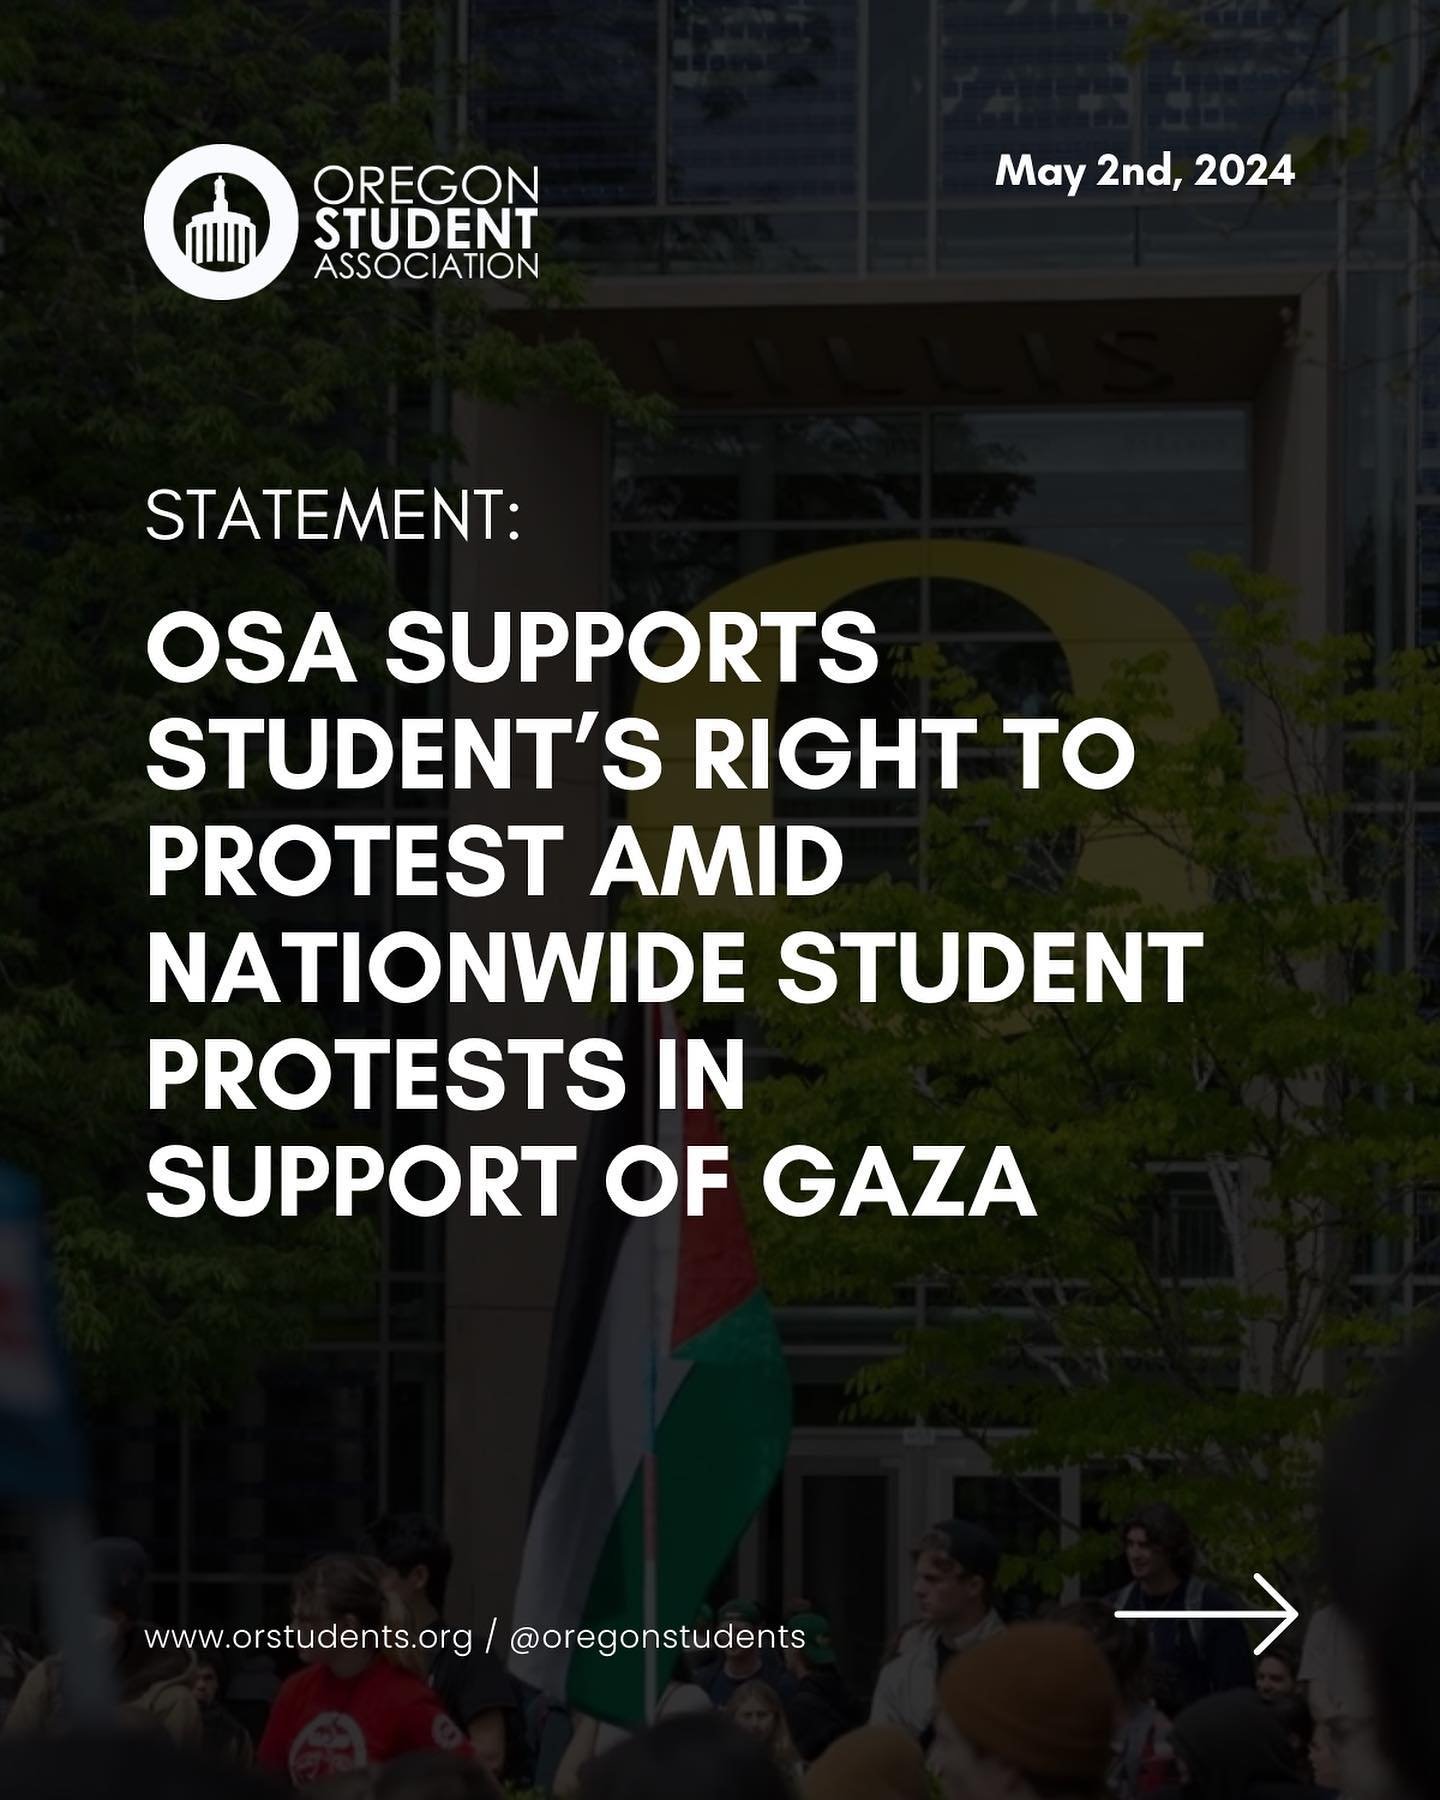 Please read our statement on OSA&rsquo;s support of student&rsquo;s right to protest amid nationwide students protests in support of Gaza&hellip;➡️

Over the last week, students at Portland State University and the University of Oregon have joined in